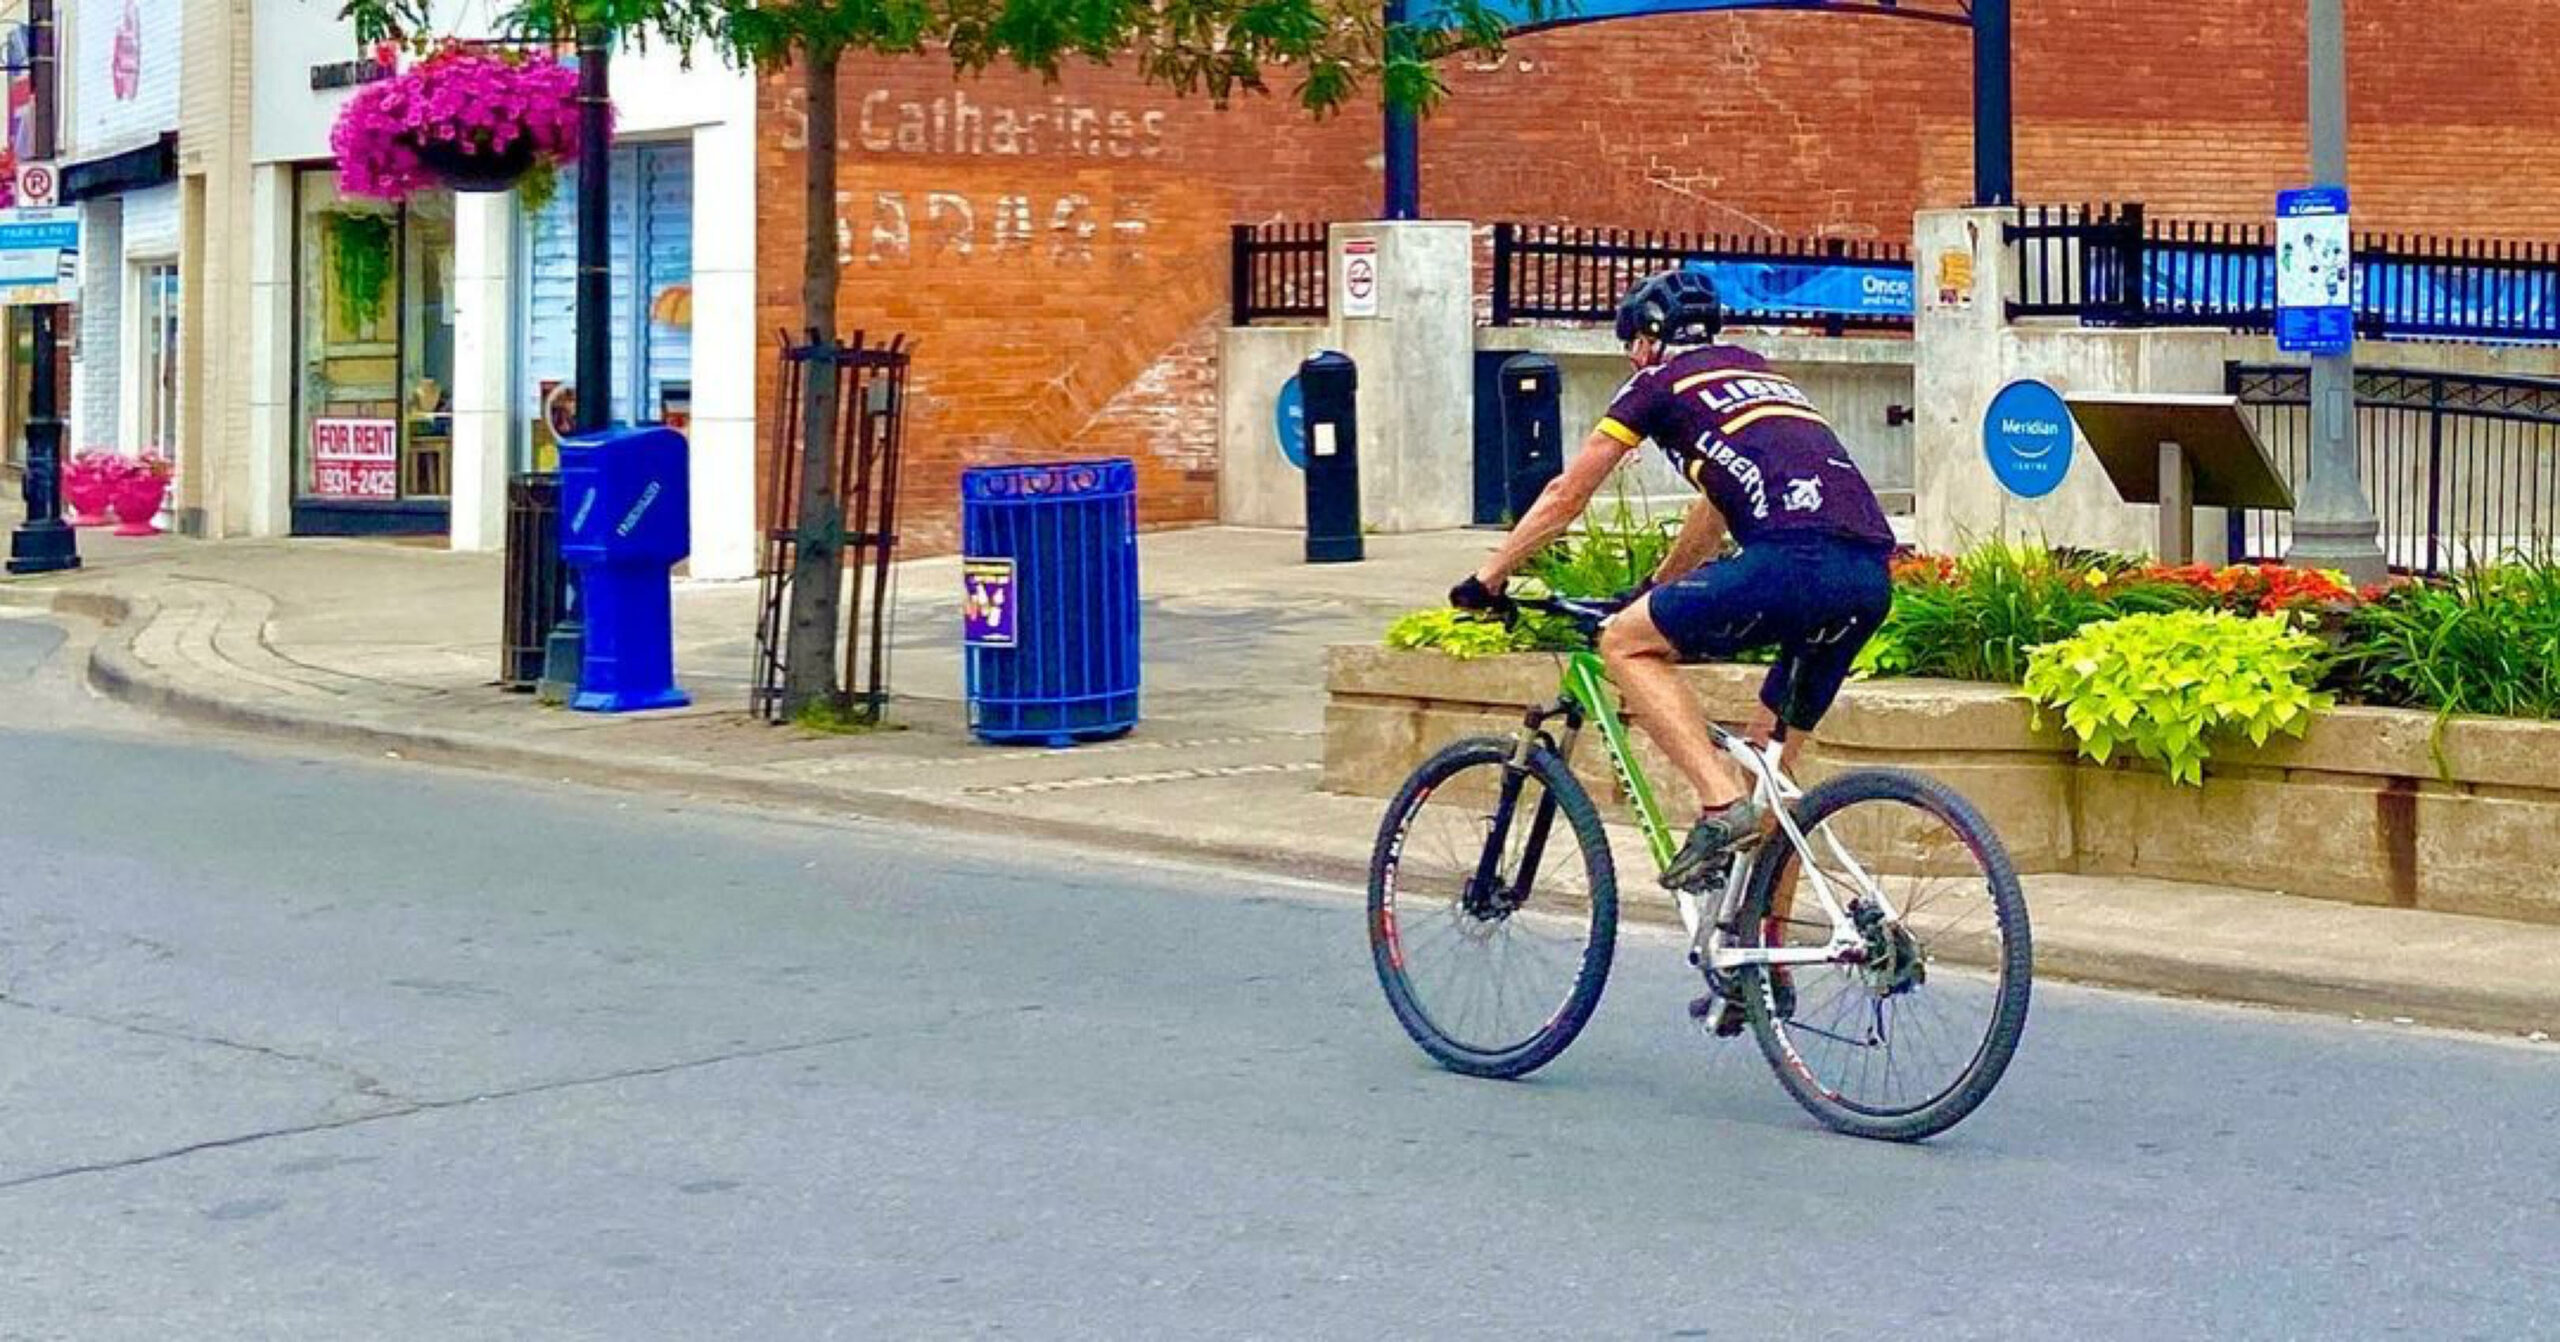 St. Catharines Downtown Association certified bicycle friendly business area